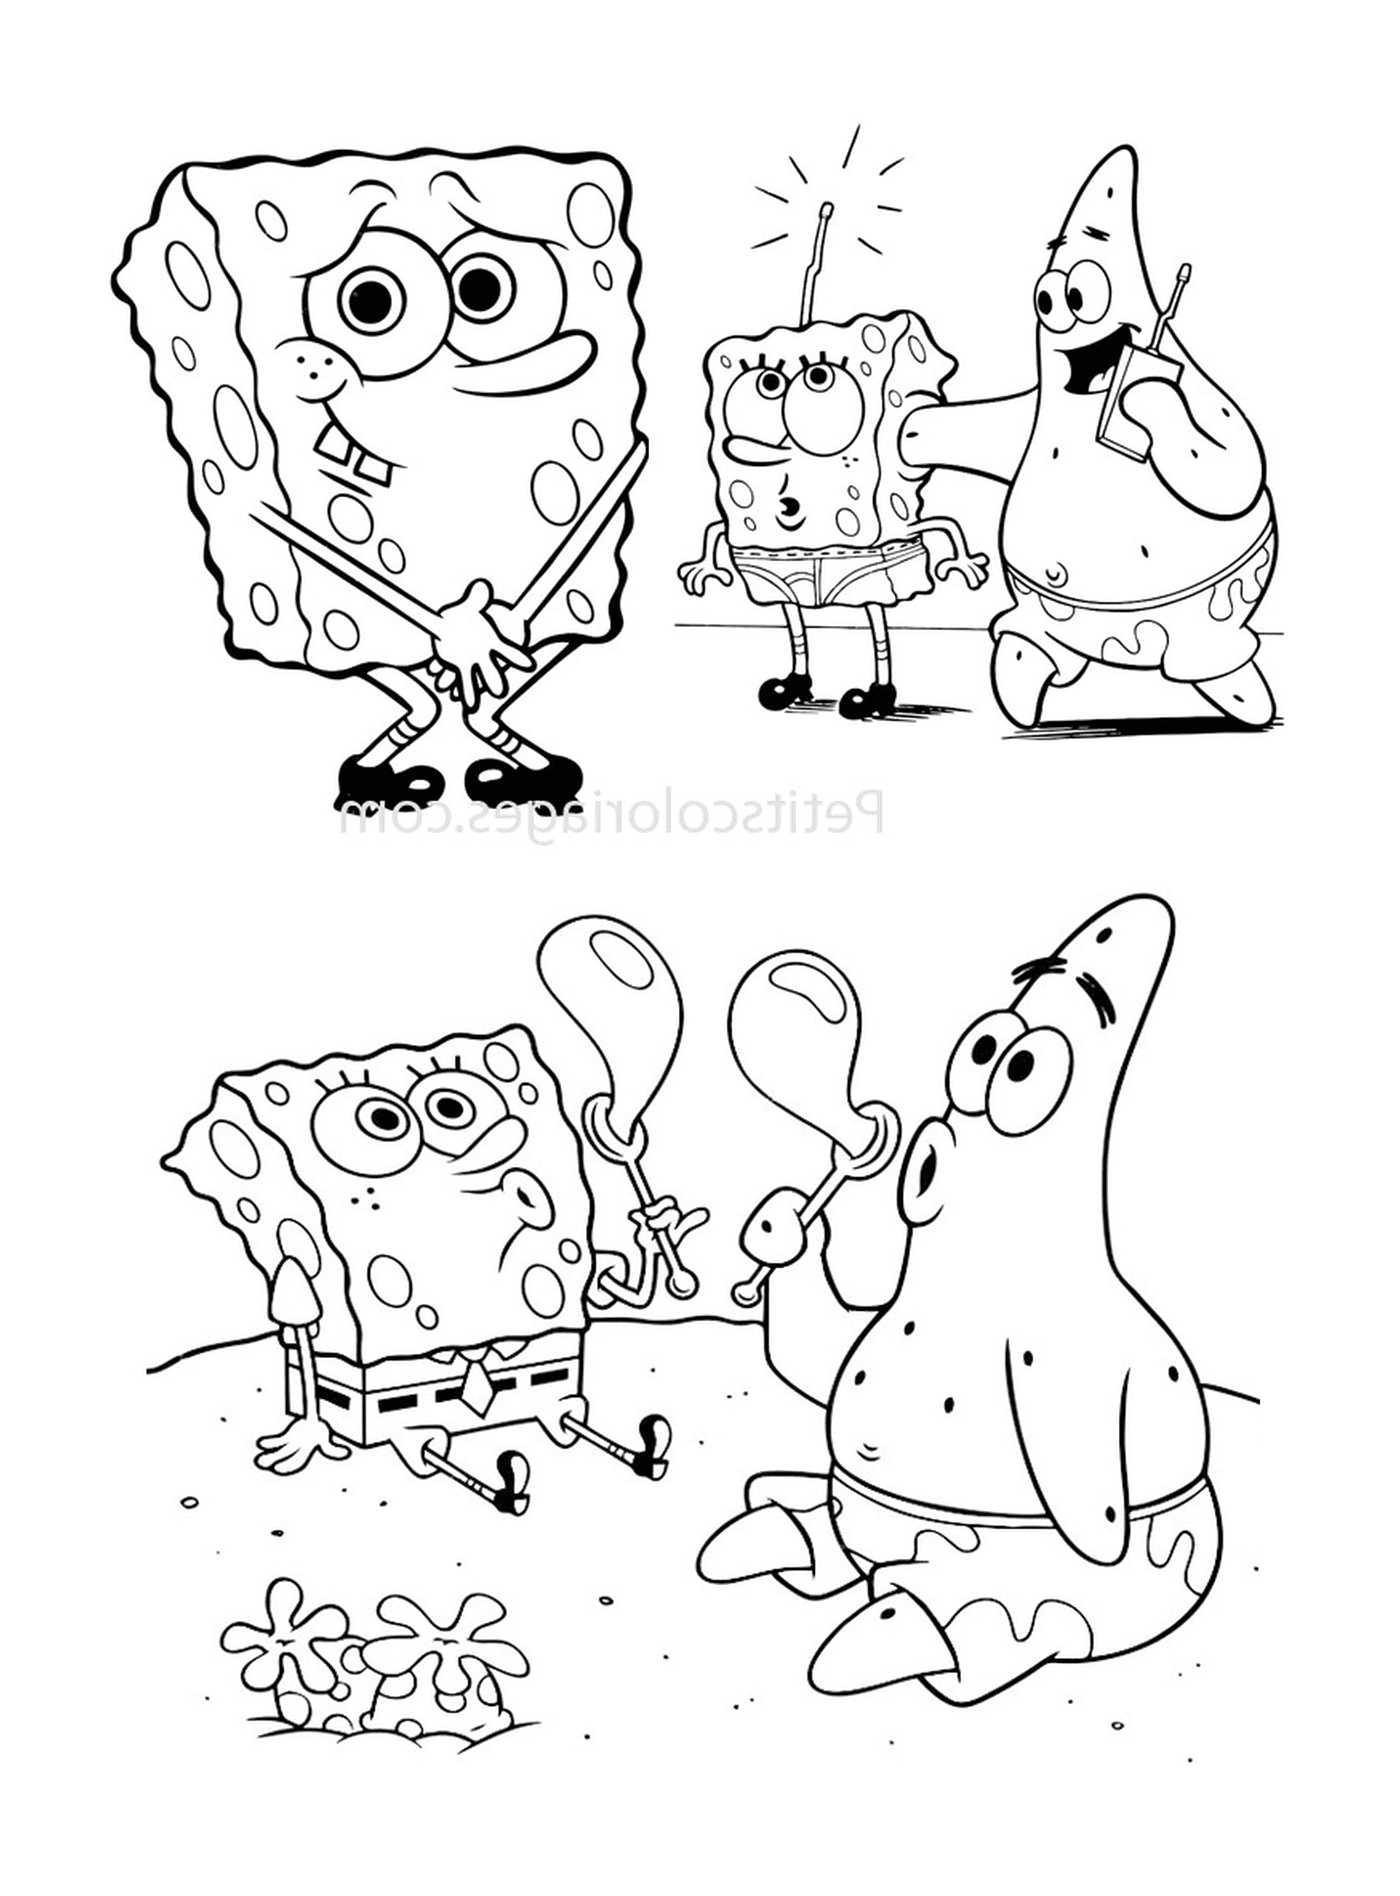  A group of characters from Bob the Sponge 